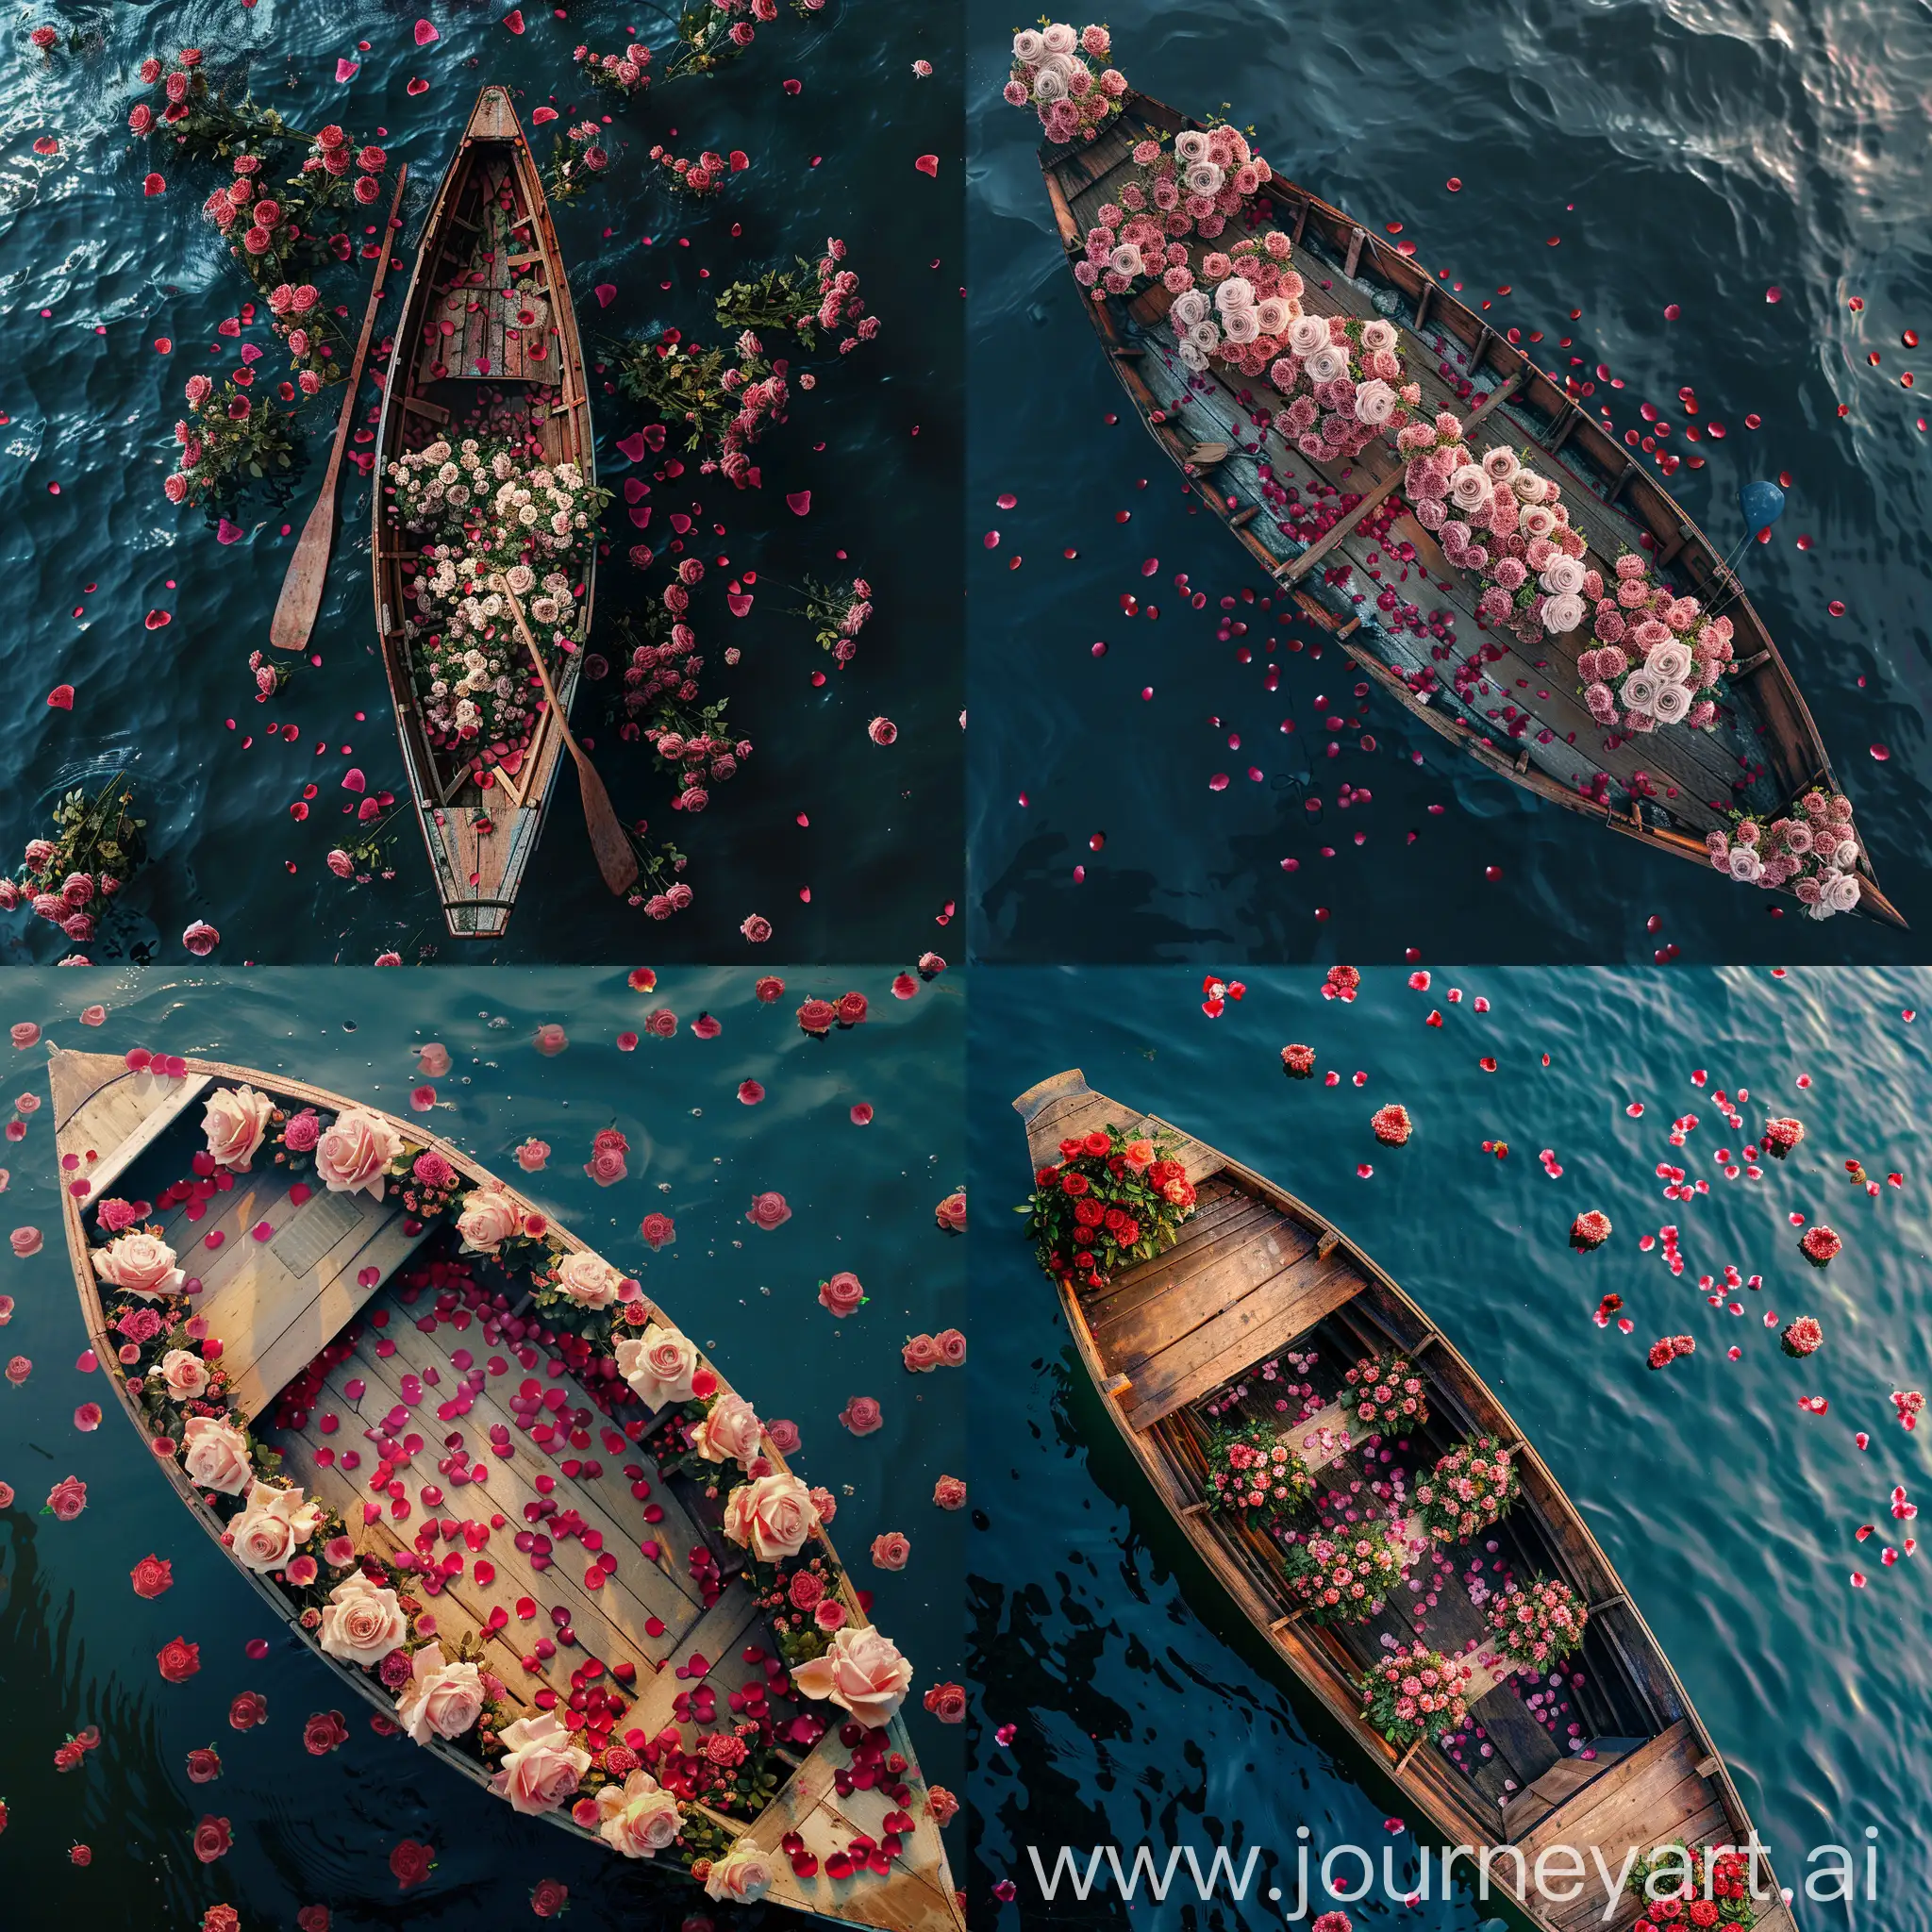 a top view of beautiful wooden boat with rose petals on it's floor and adorned with rose blooms. the boat floats on clean dark blue water covered with bunches of rose blossoms, full height, in the style of packed with hidden details, delicate flowers, sketch style, HD